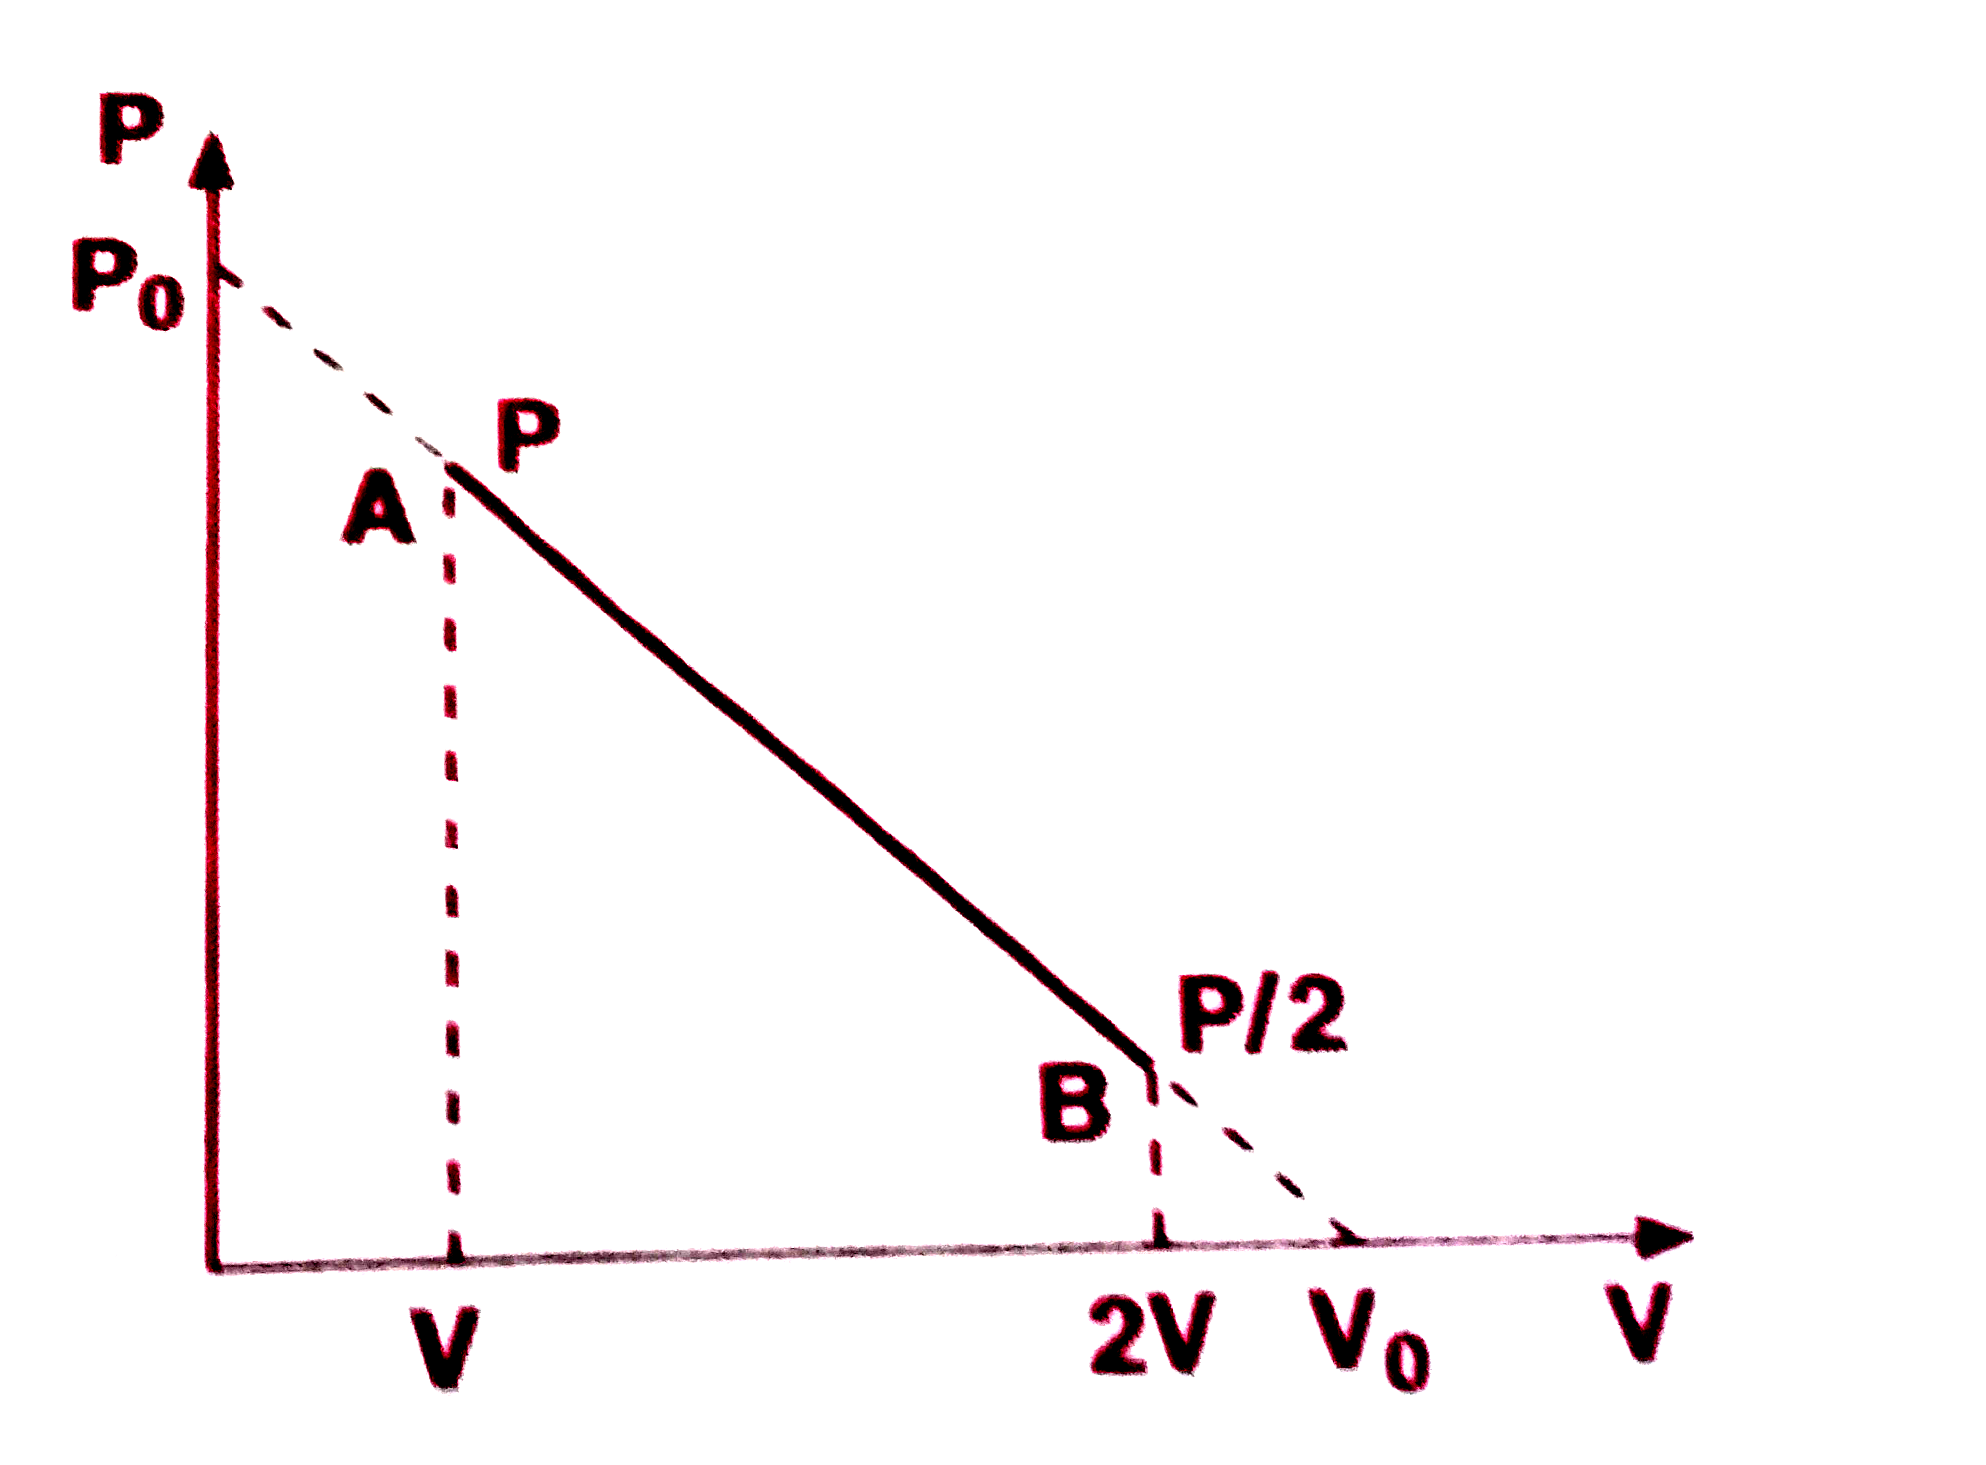 An ideal gas is taken from the state A (pressure P, volume V) to the state B (pressure P/2, volume 2V) along a straight line path in the P-V diagram. Select the wrong statement from the following: